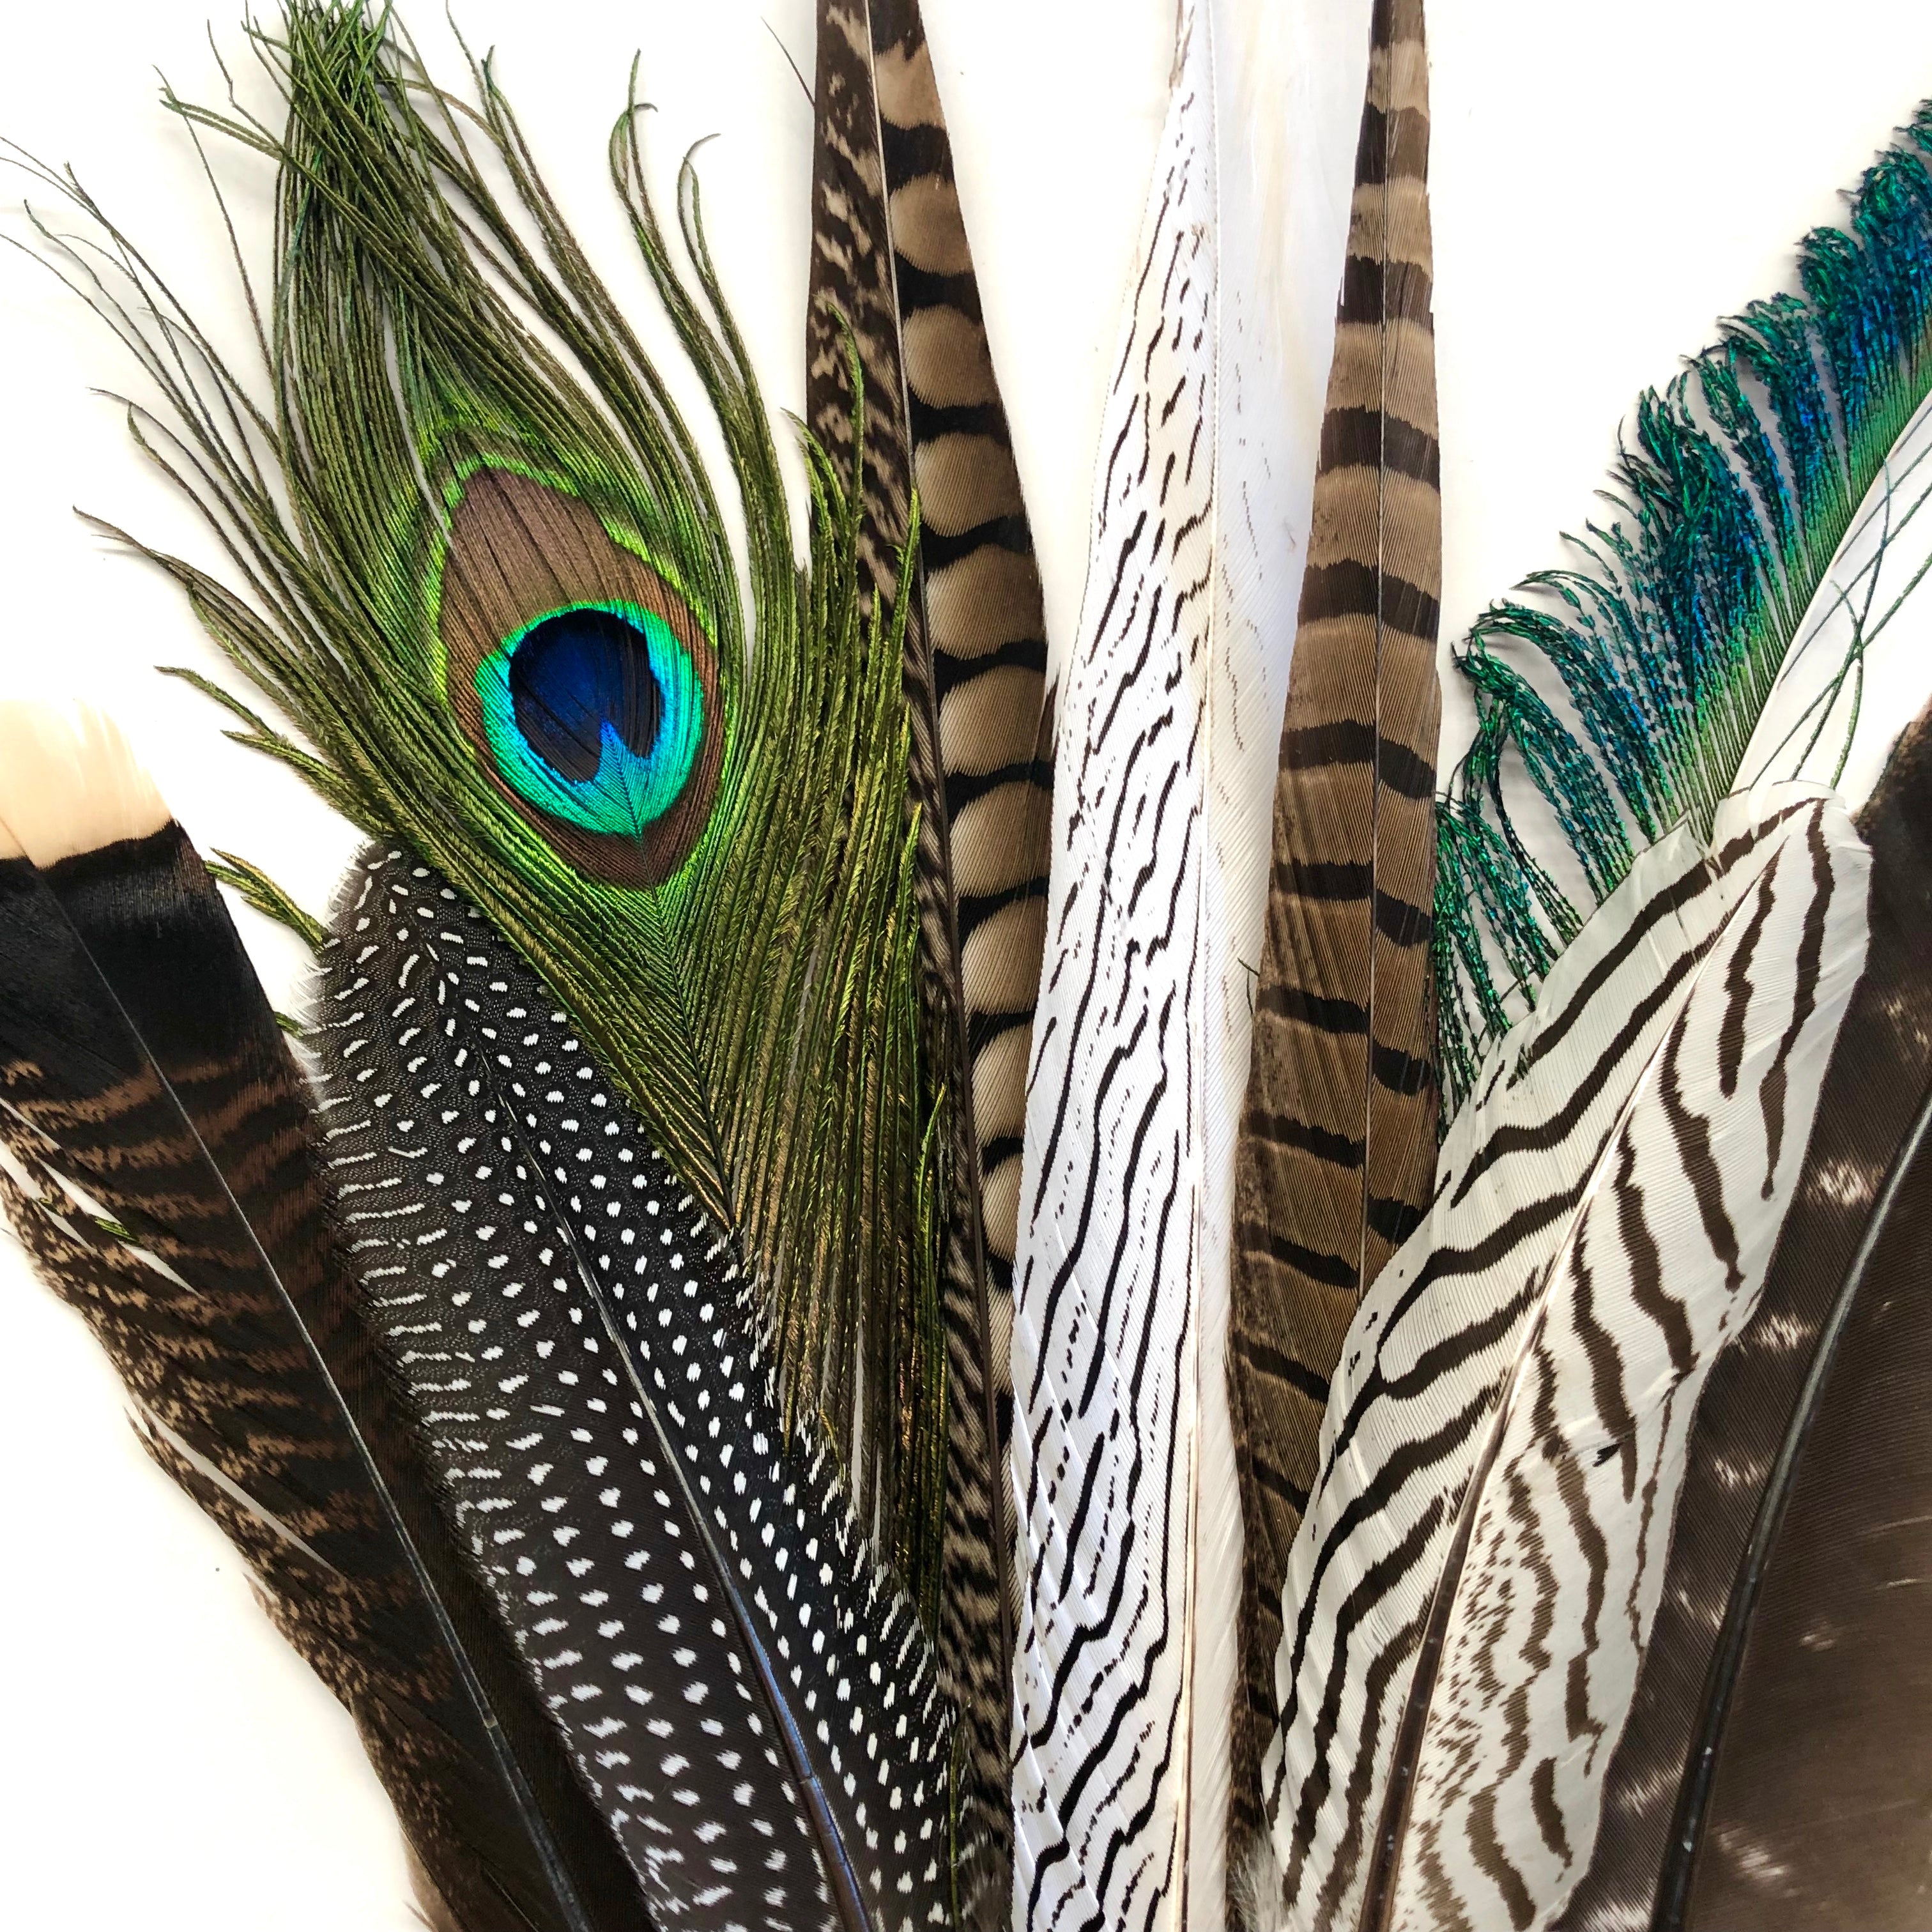 Large Natural Feathers 20-35cm Mixed Pack x 10pcs